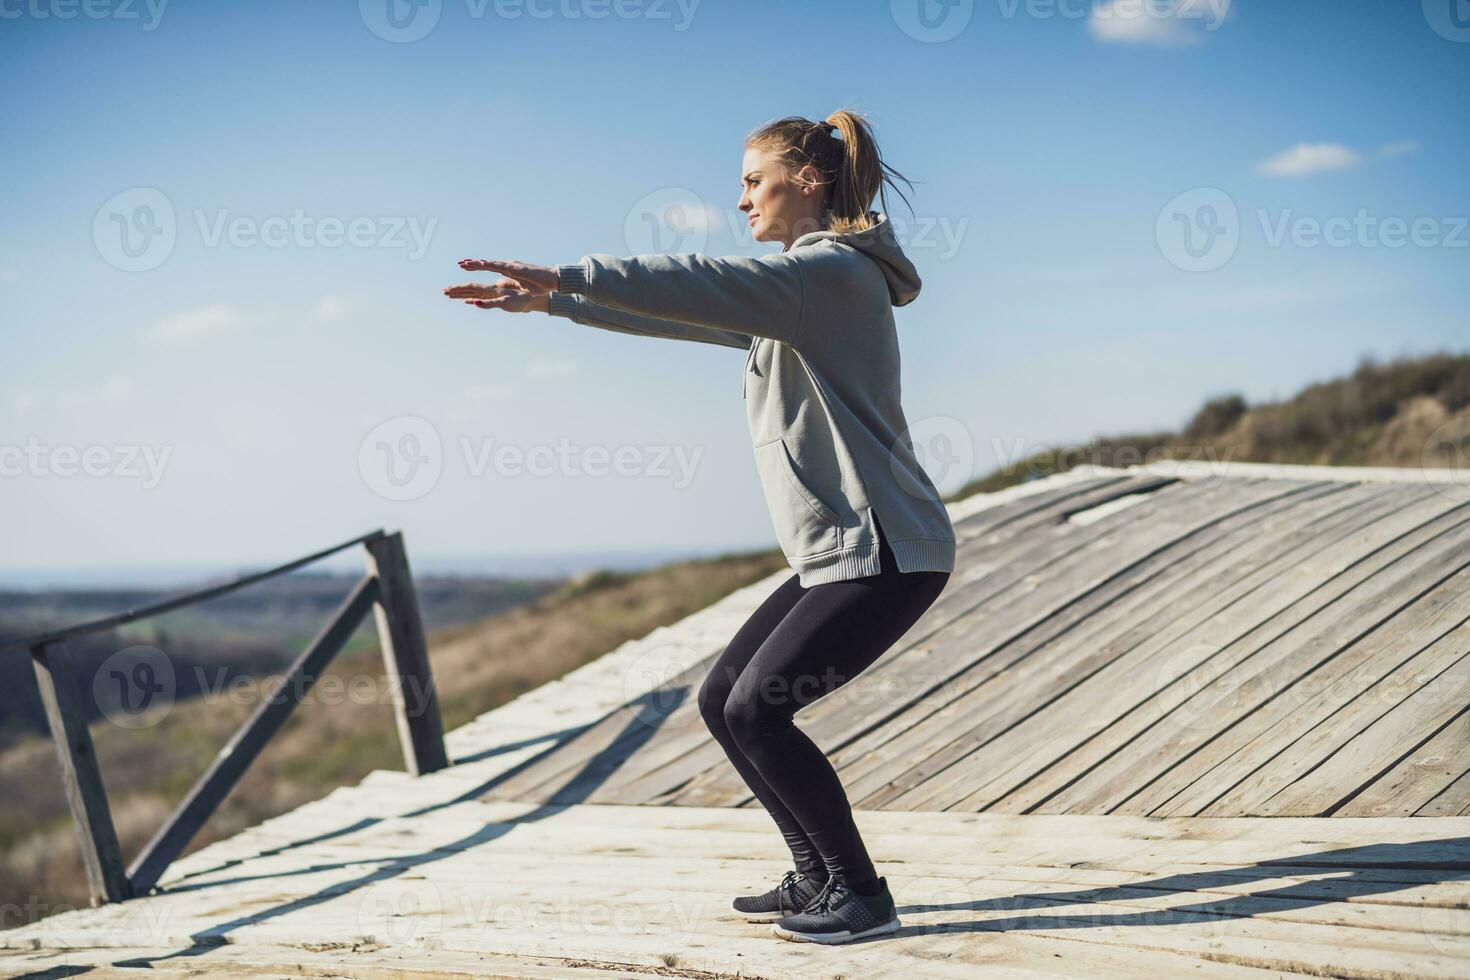 Woman enjoys exercising at the old wooden bridge in nature photo